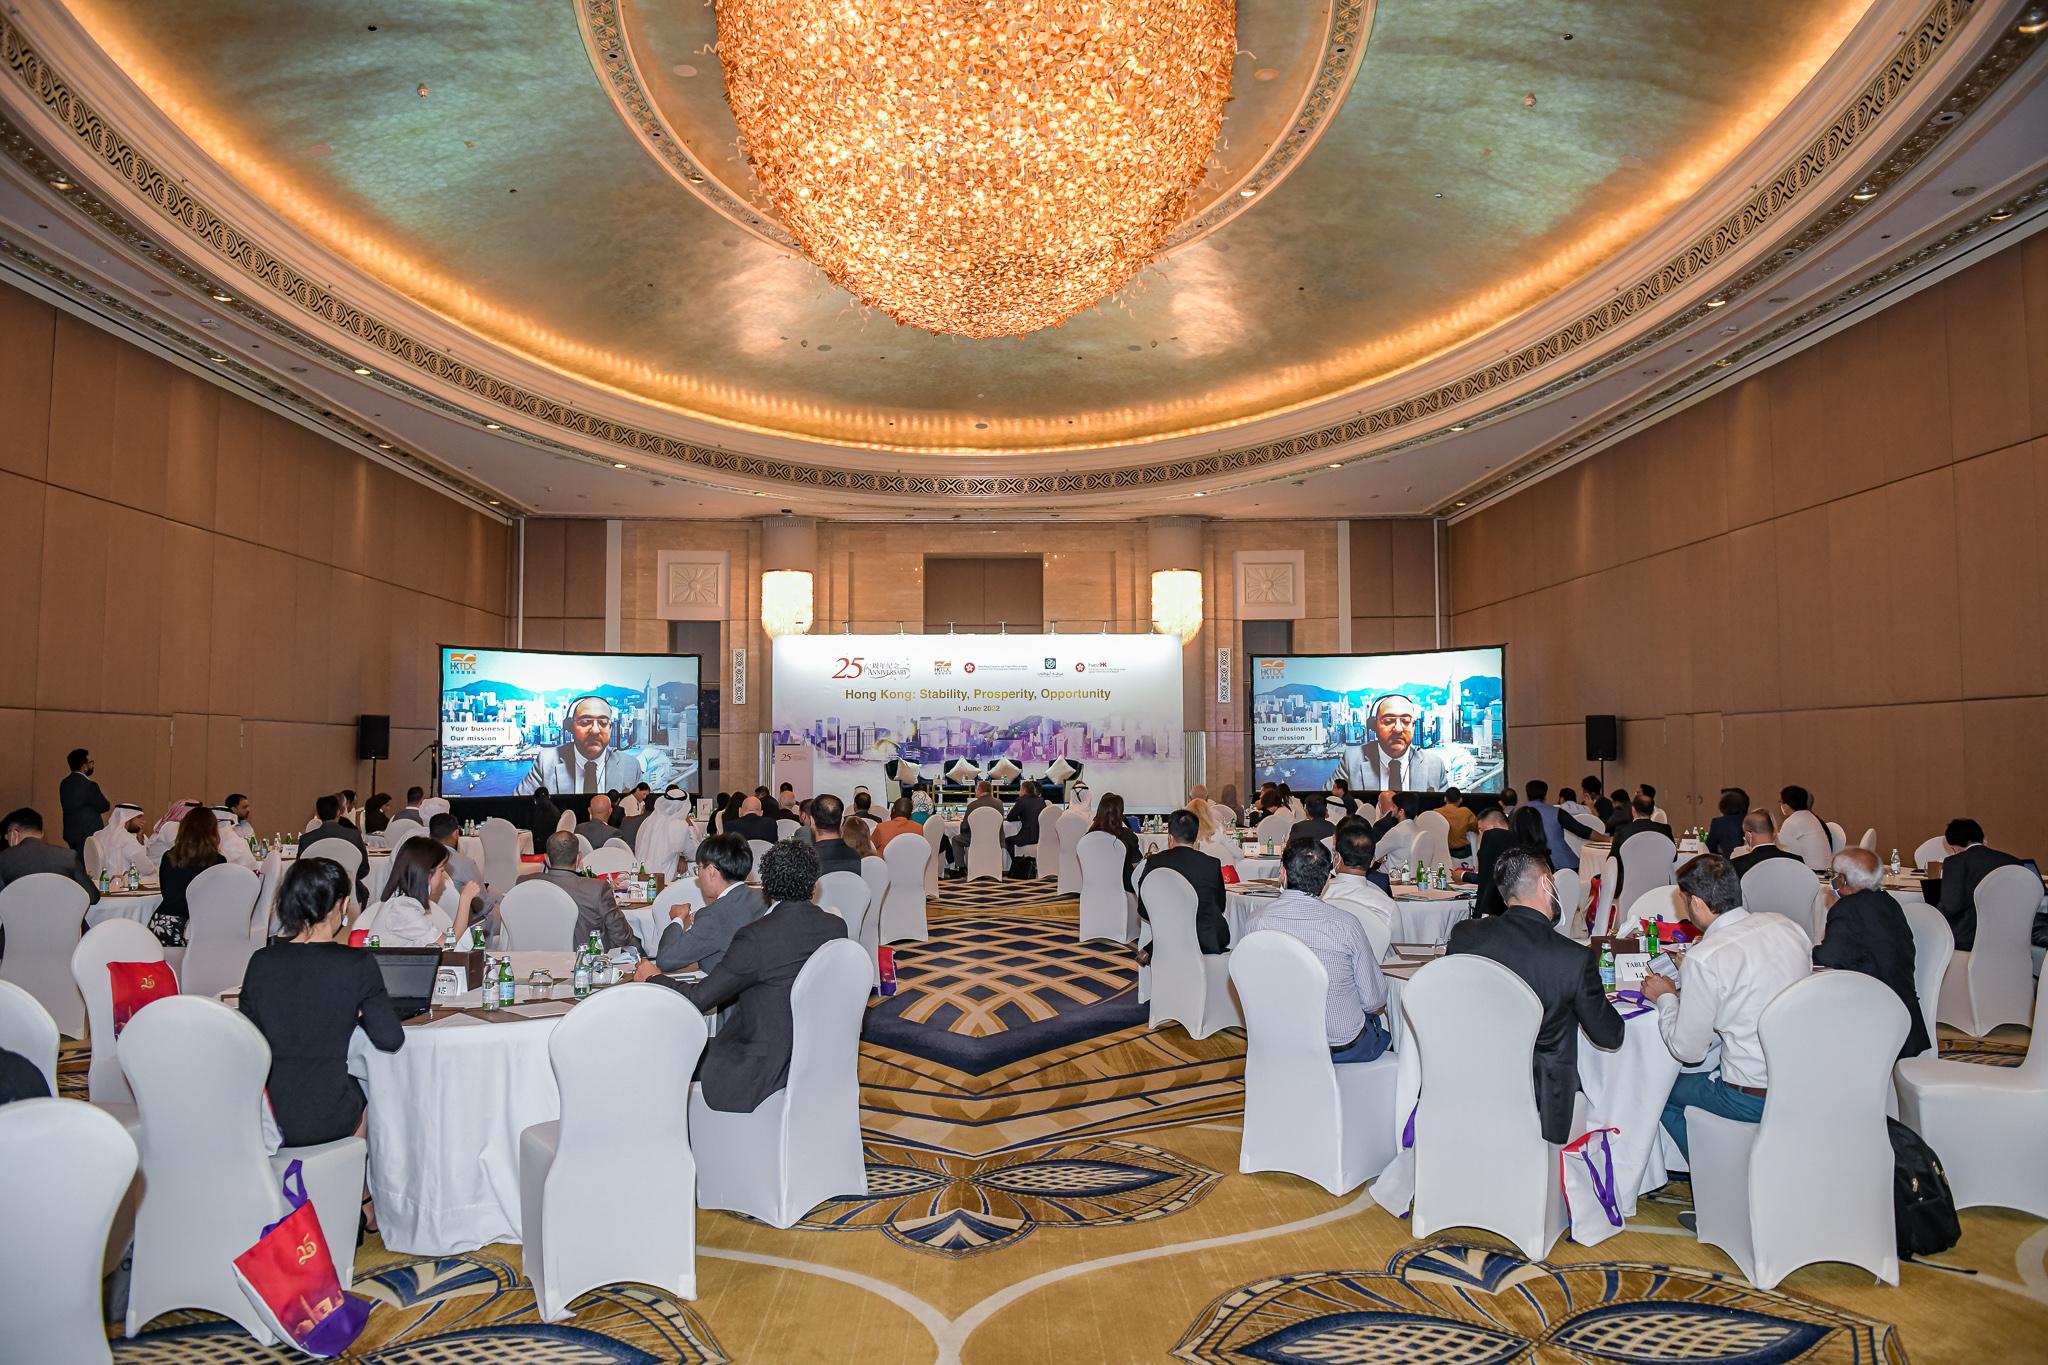 The Hong Kong Economic and Trade Office in Dubai held a business seminar and luncheon in Abu Dhabi to celebrate the 25th anniversary of the establishment of the Hong Kong Special Administrative Region on June 1 (Abu Dhabi time). Photo shows the guests attending the seminar.